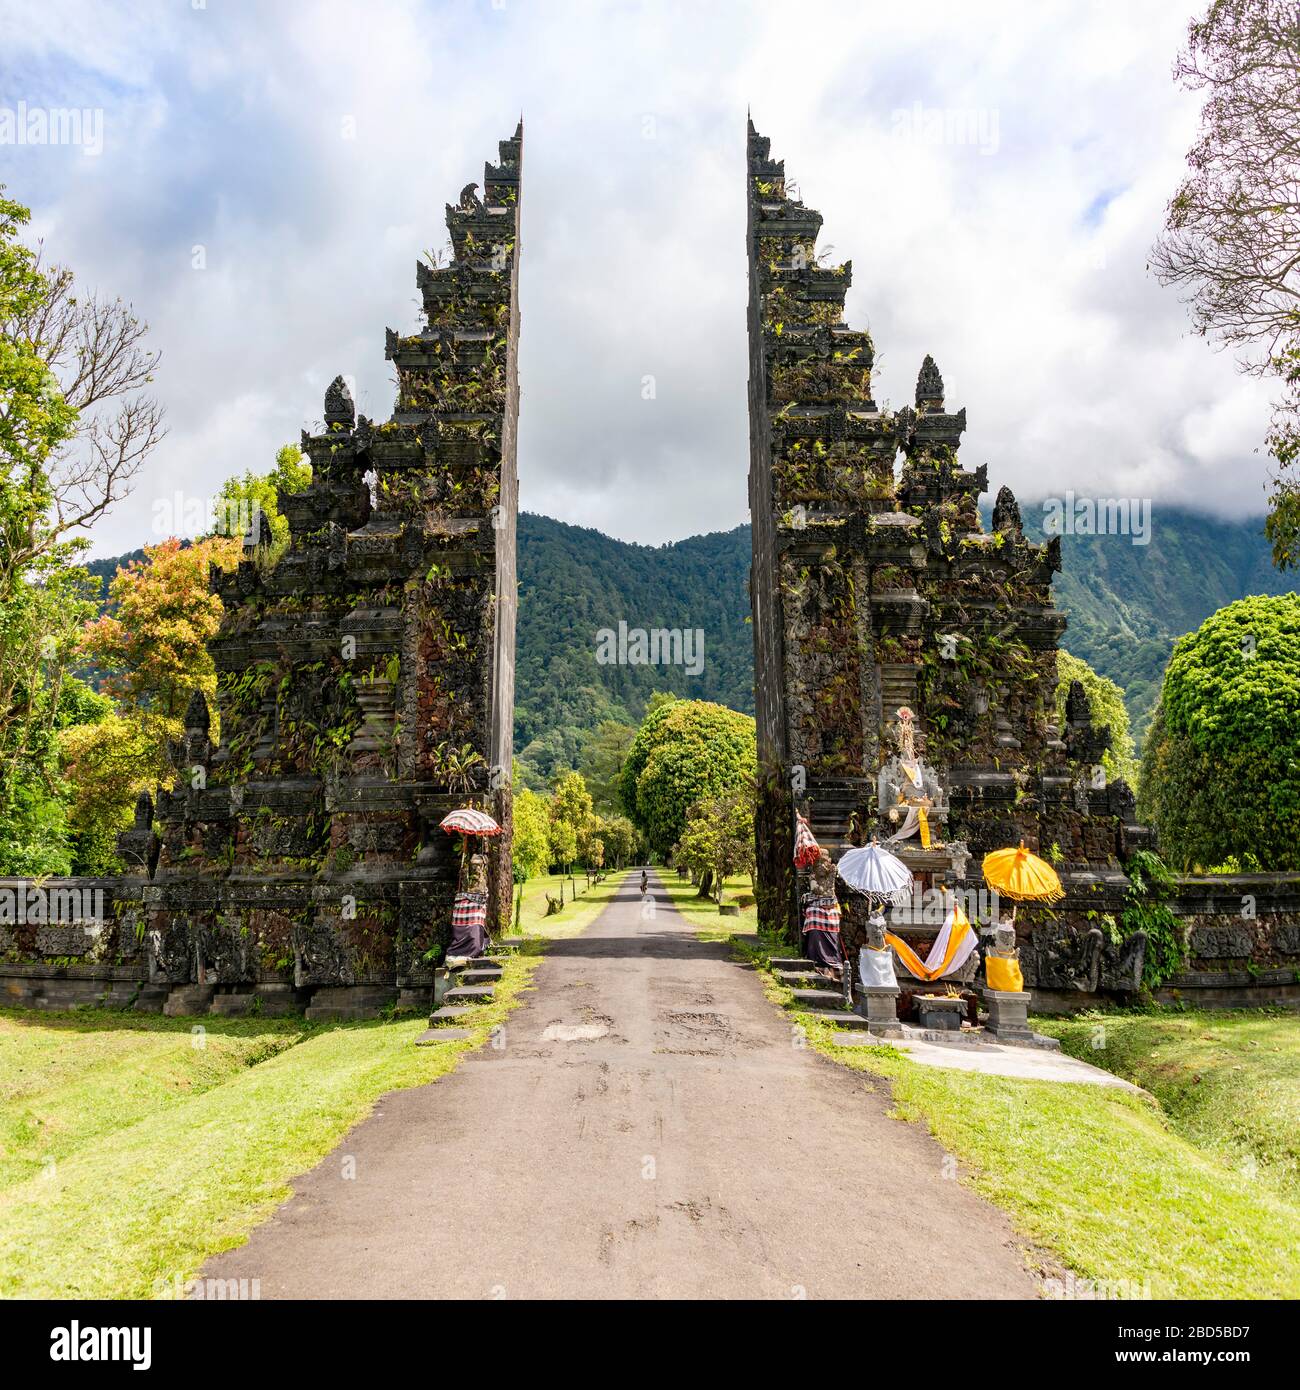 Square view of the iconic Handara Gate in Bali, Indonesia. Stock Photo